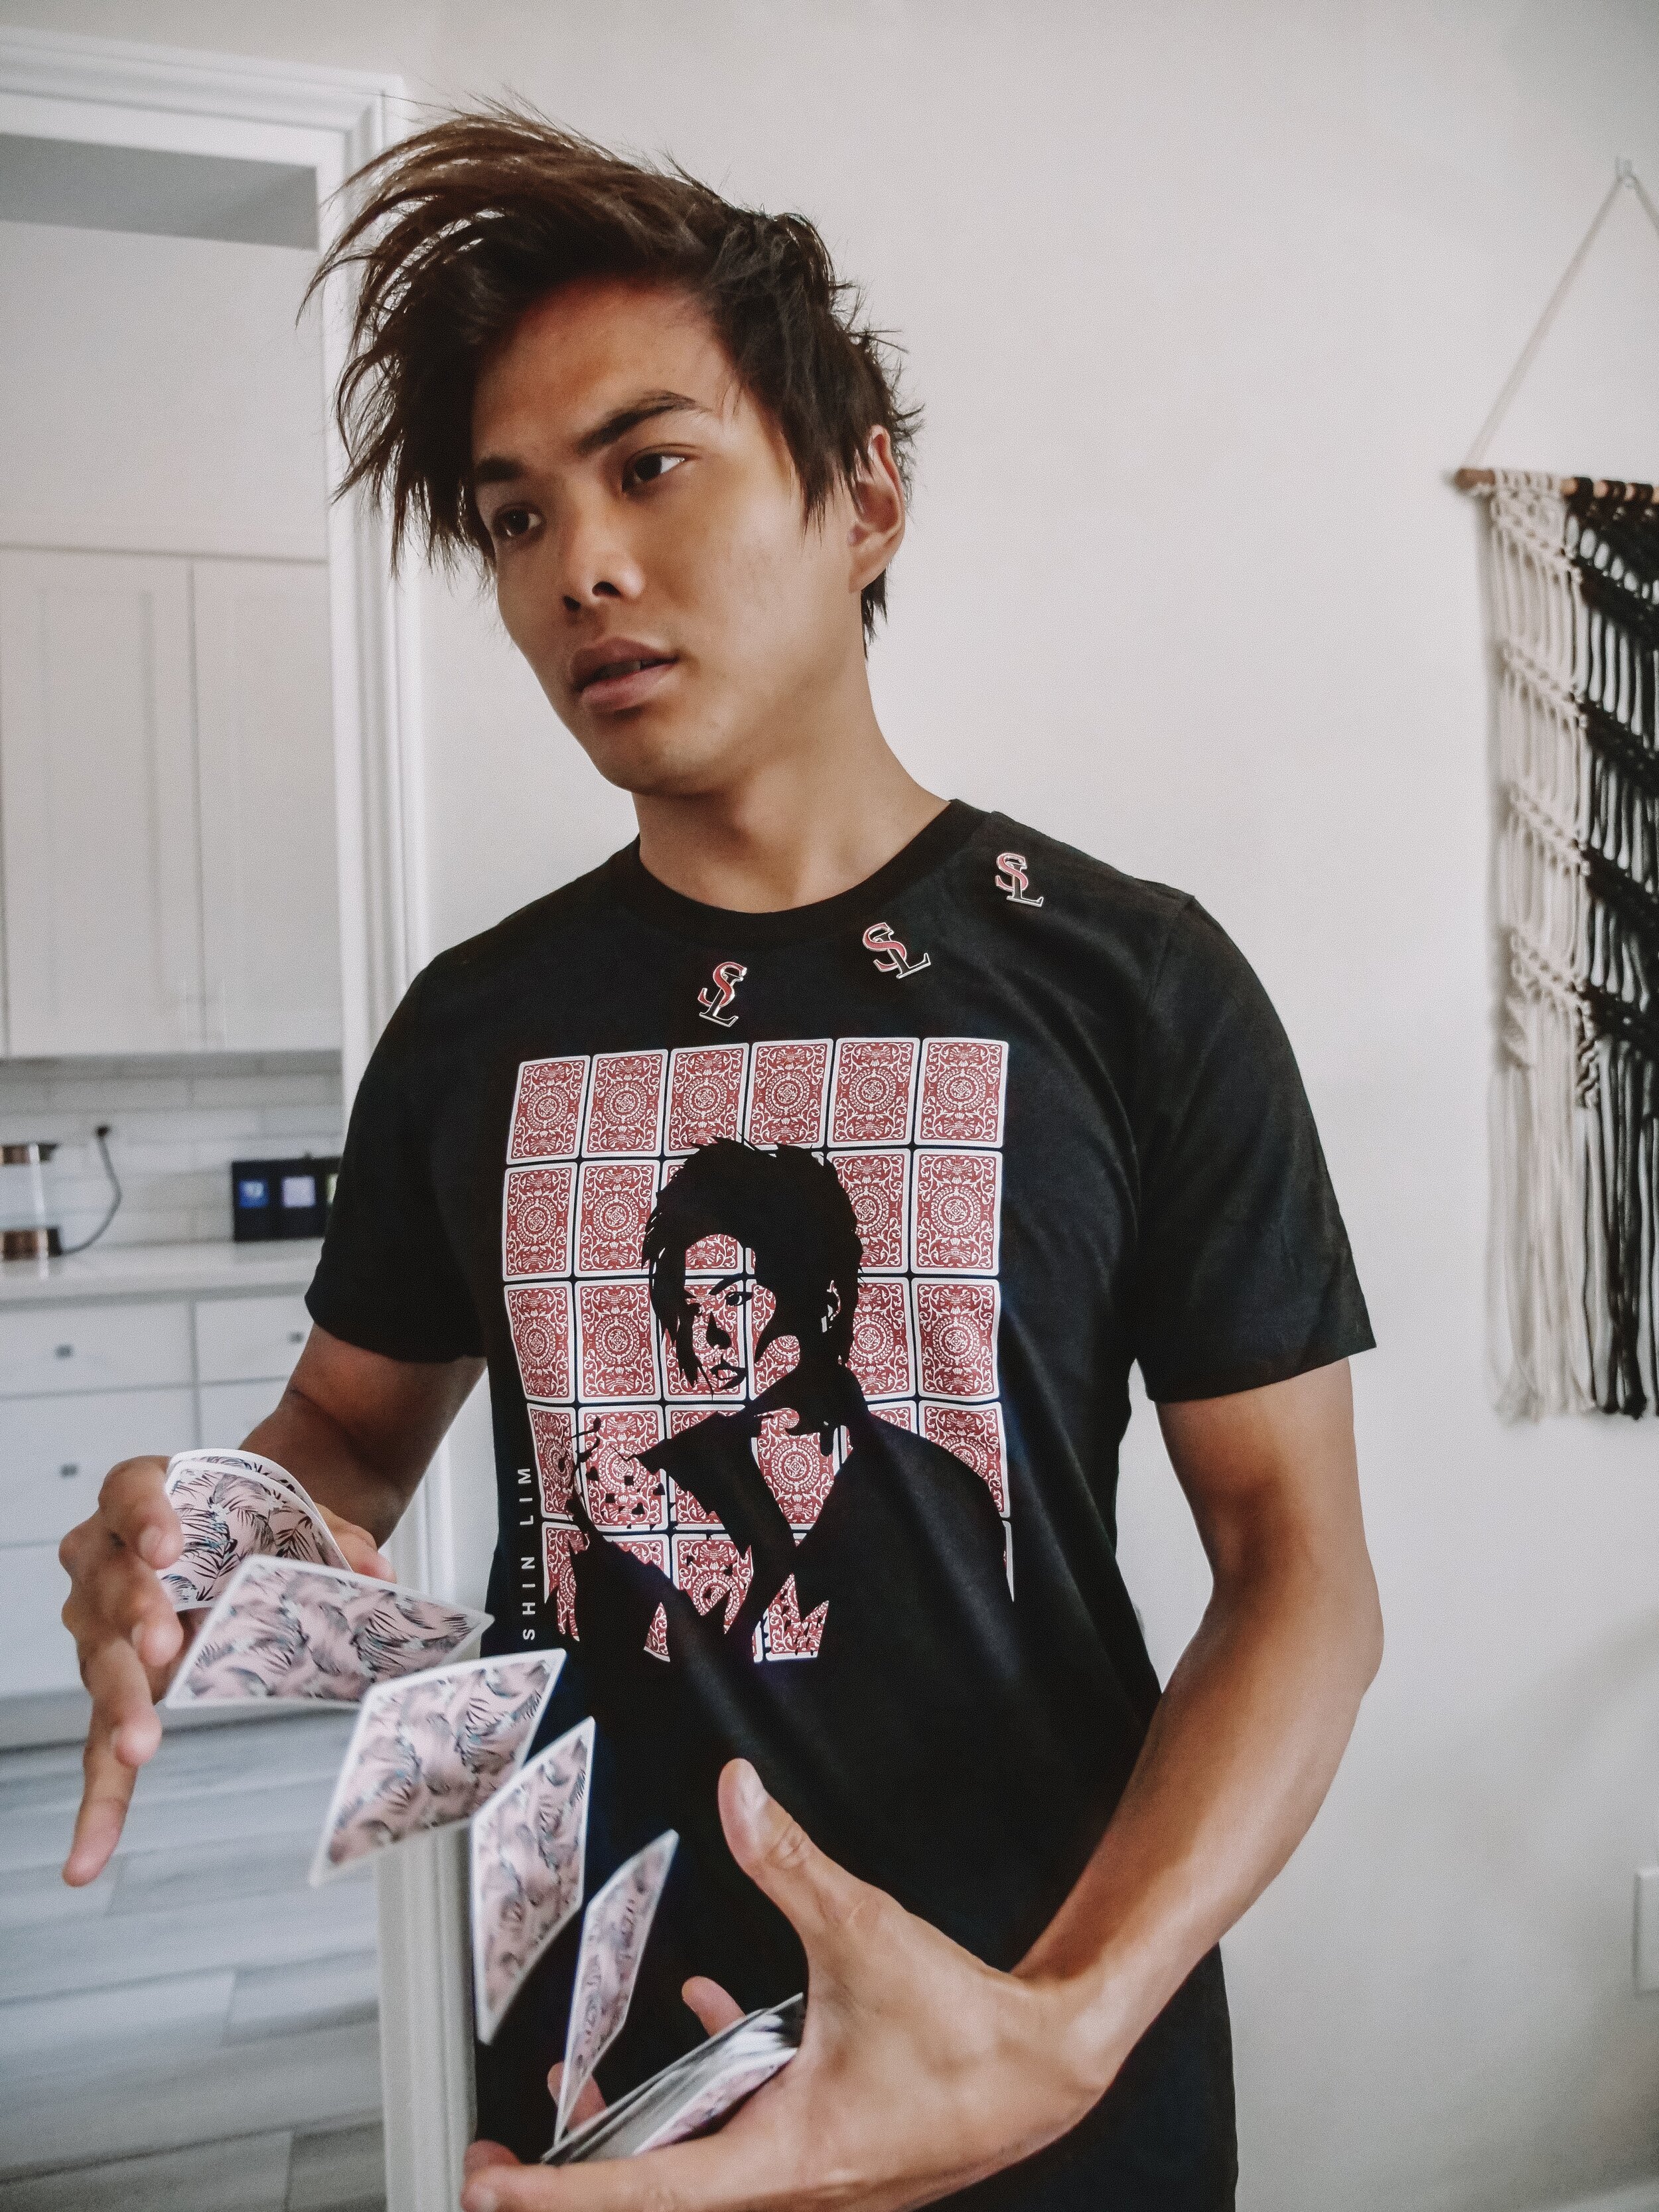 S L T Shirts Shin Lim Magic Welcome To The Art Of Illusion